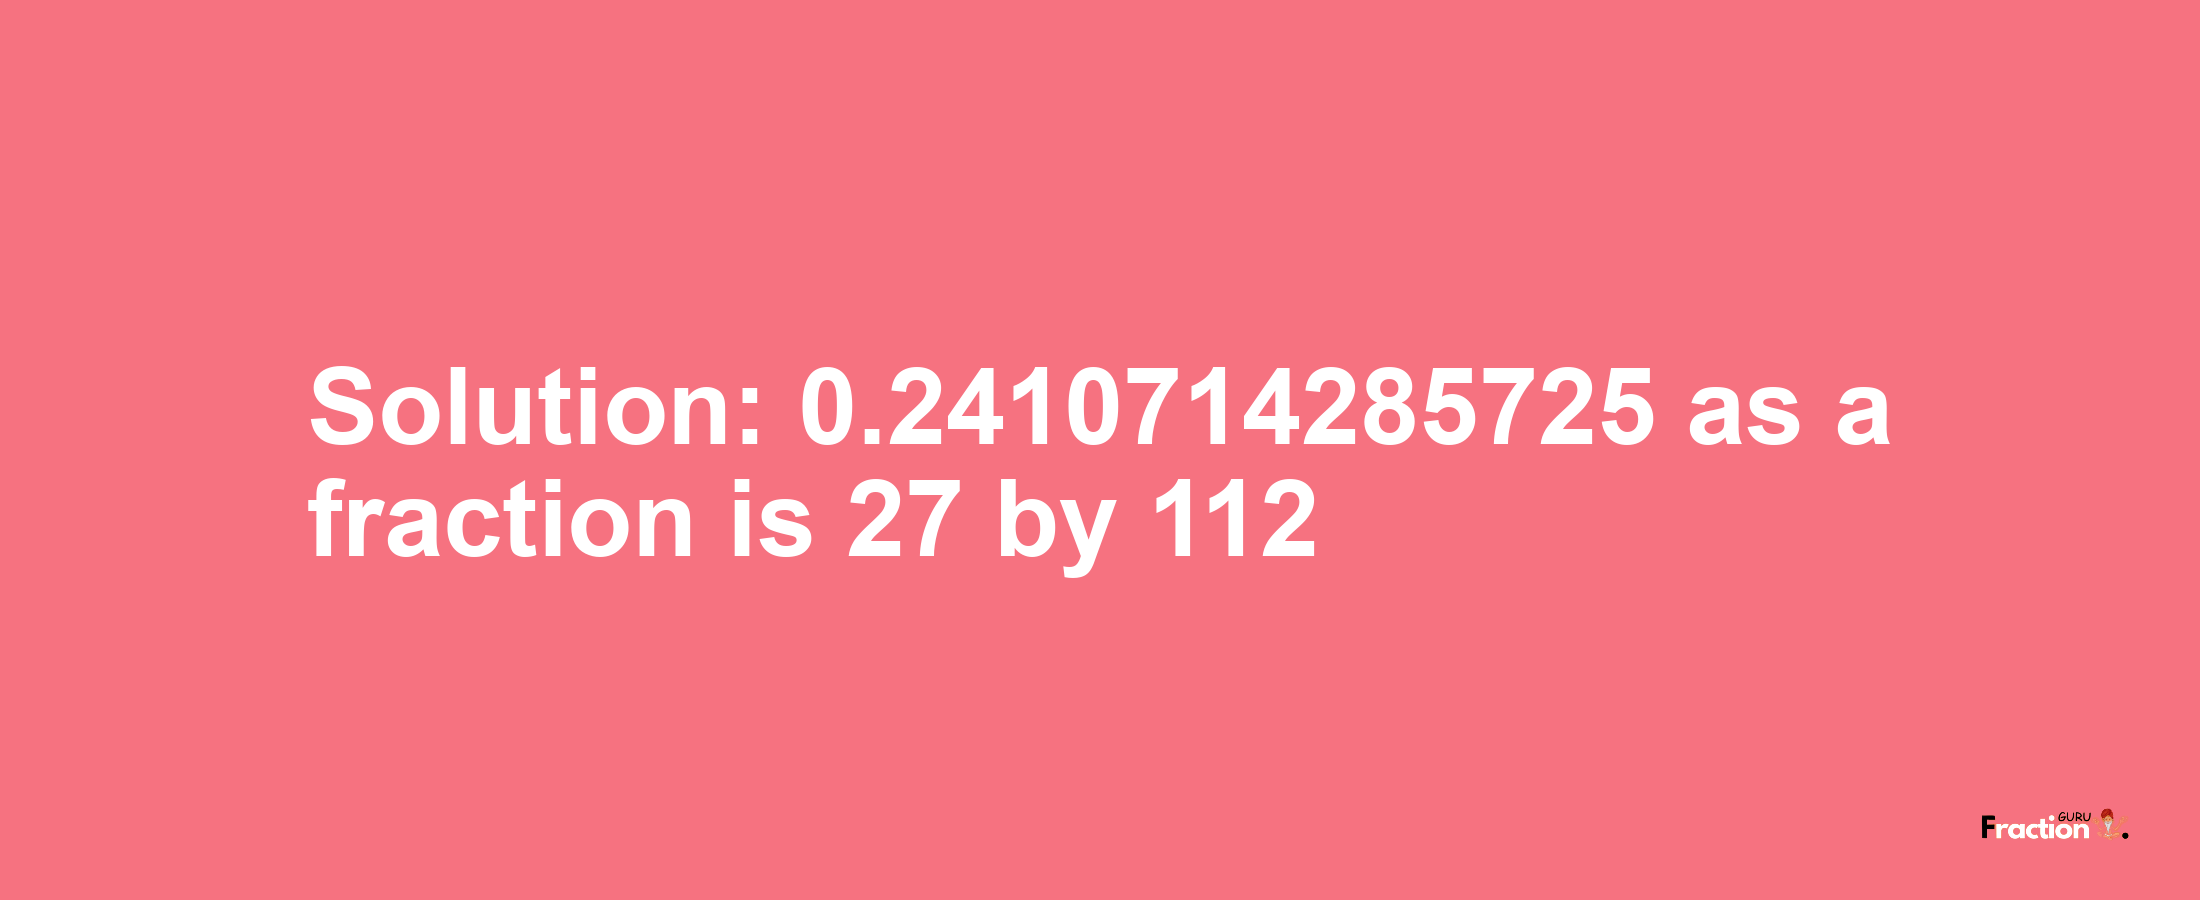 Solution:0.2410714285725 as a fraction is 27/112